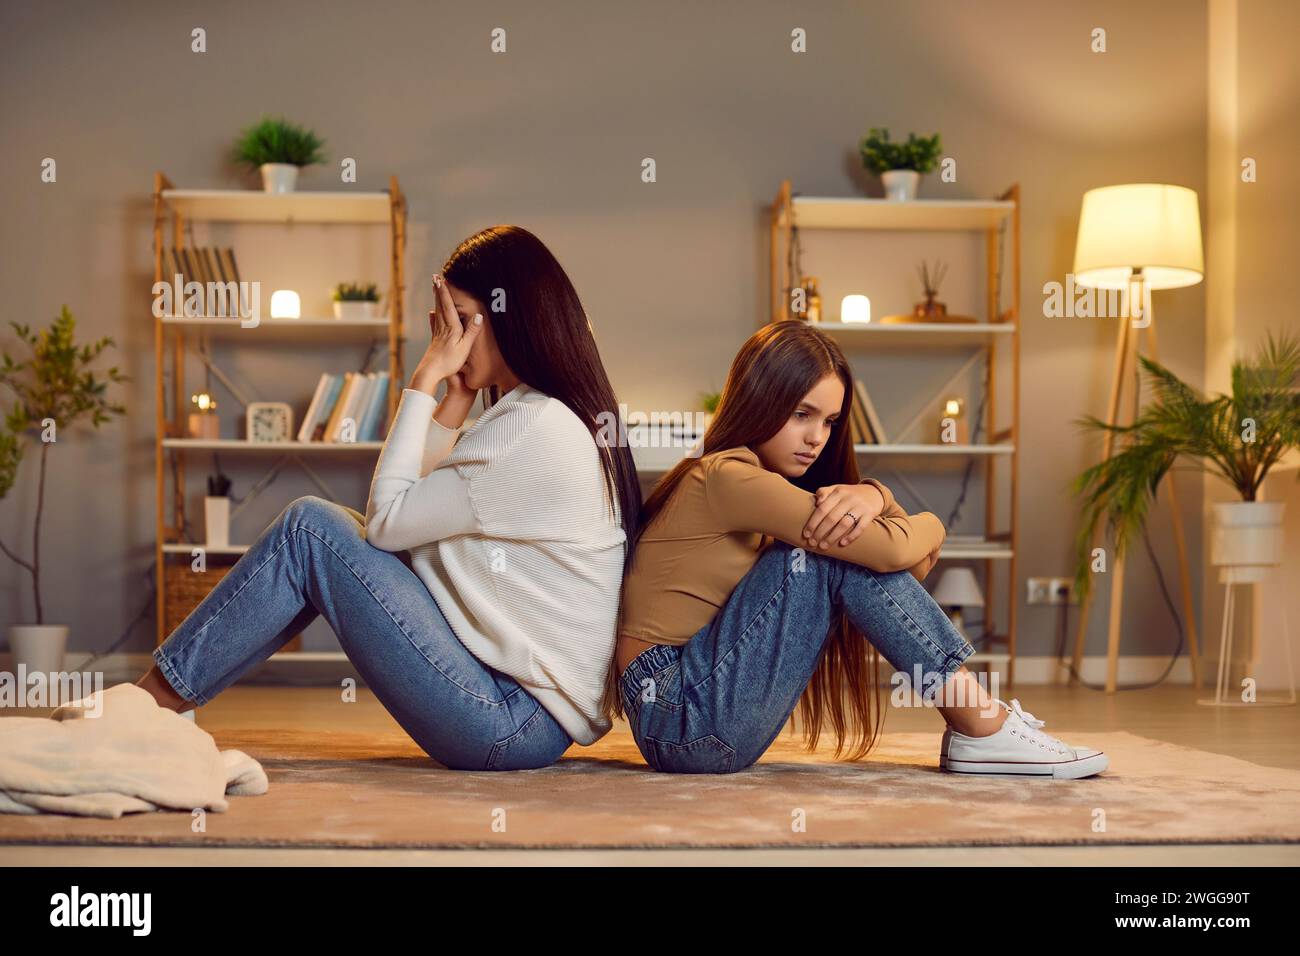 Mother and daughter conflict, miscommunication sitting back to each other Stock Photo